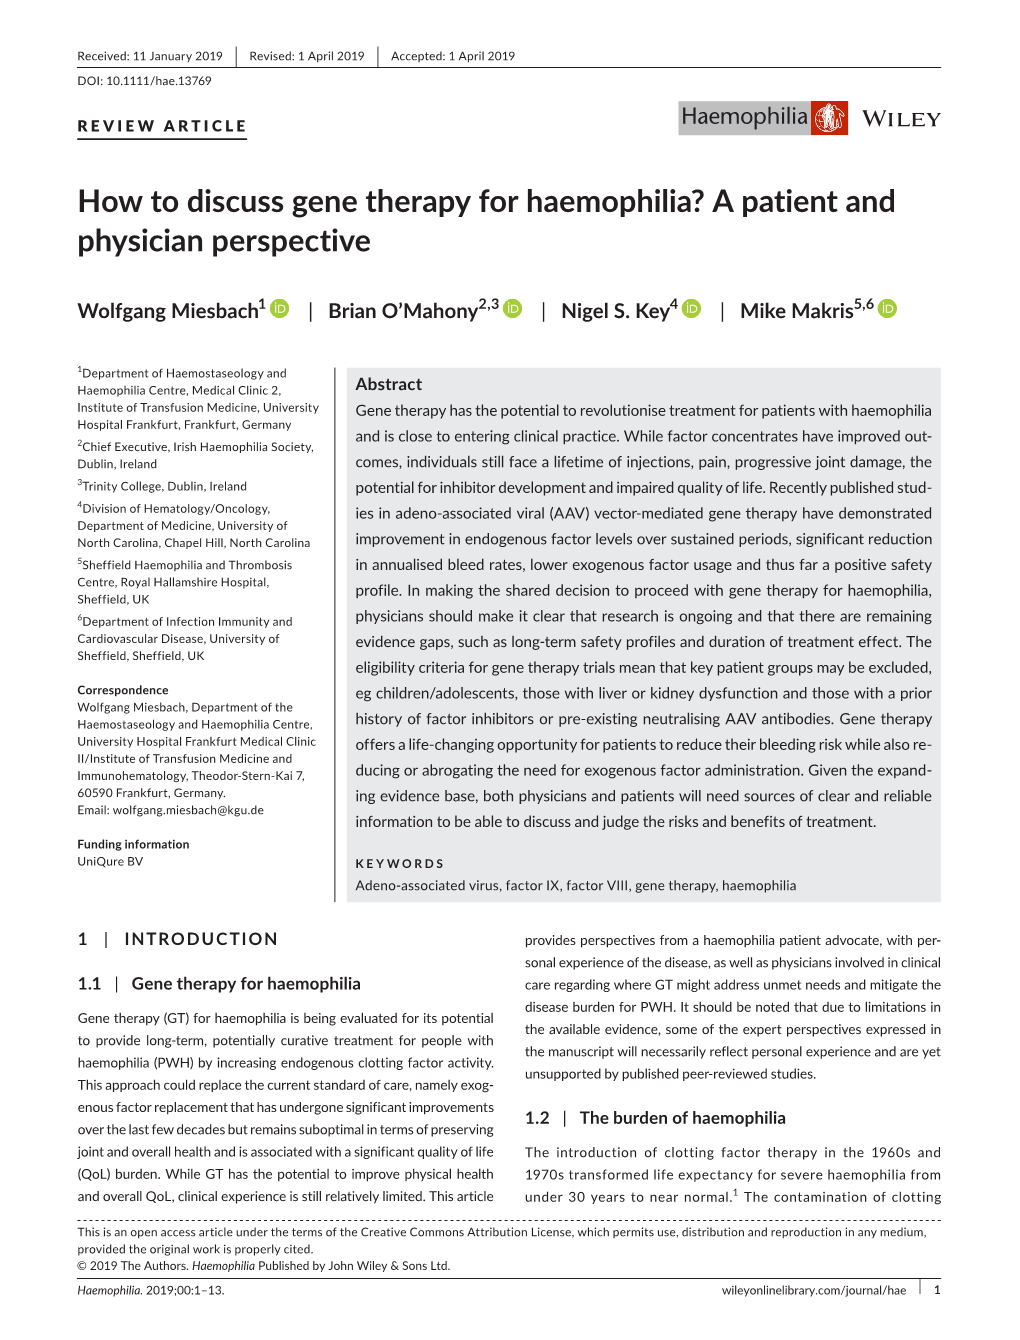 How to Discuss Gene Therapy for Haemophilia? a Patient and Physician Perspective